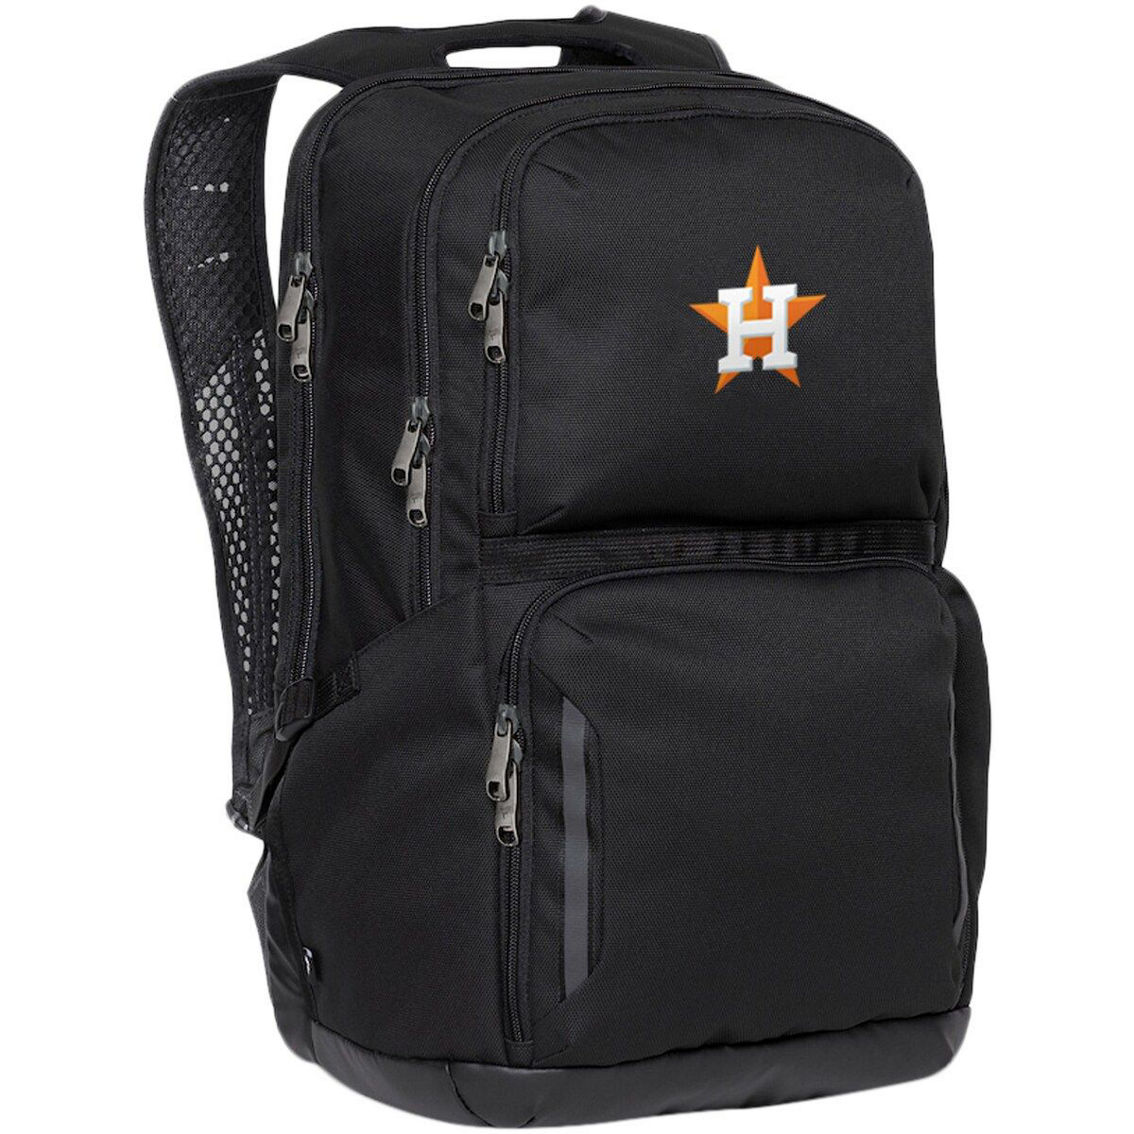 WinCraft Houston Astros MVP Backpack - Image 2 of 2